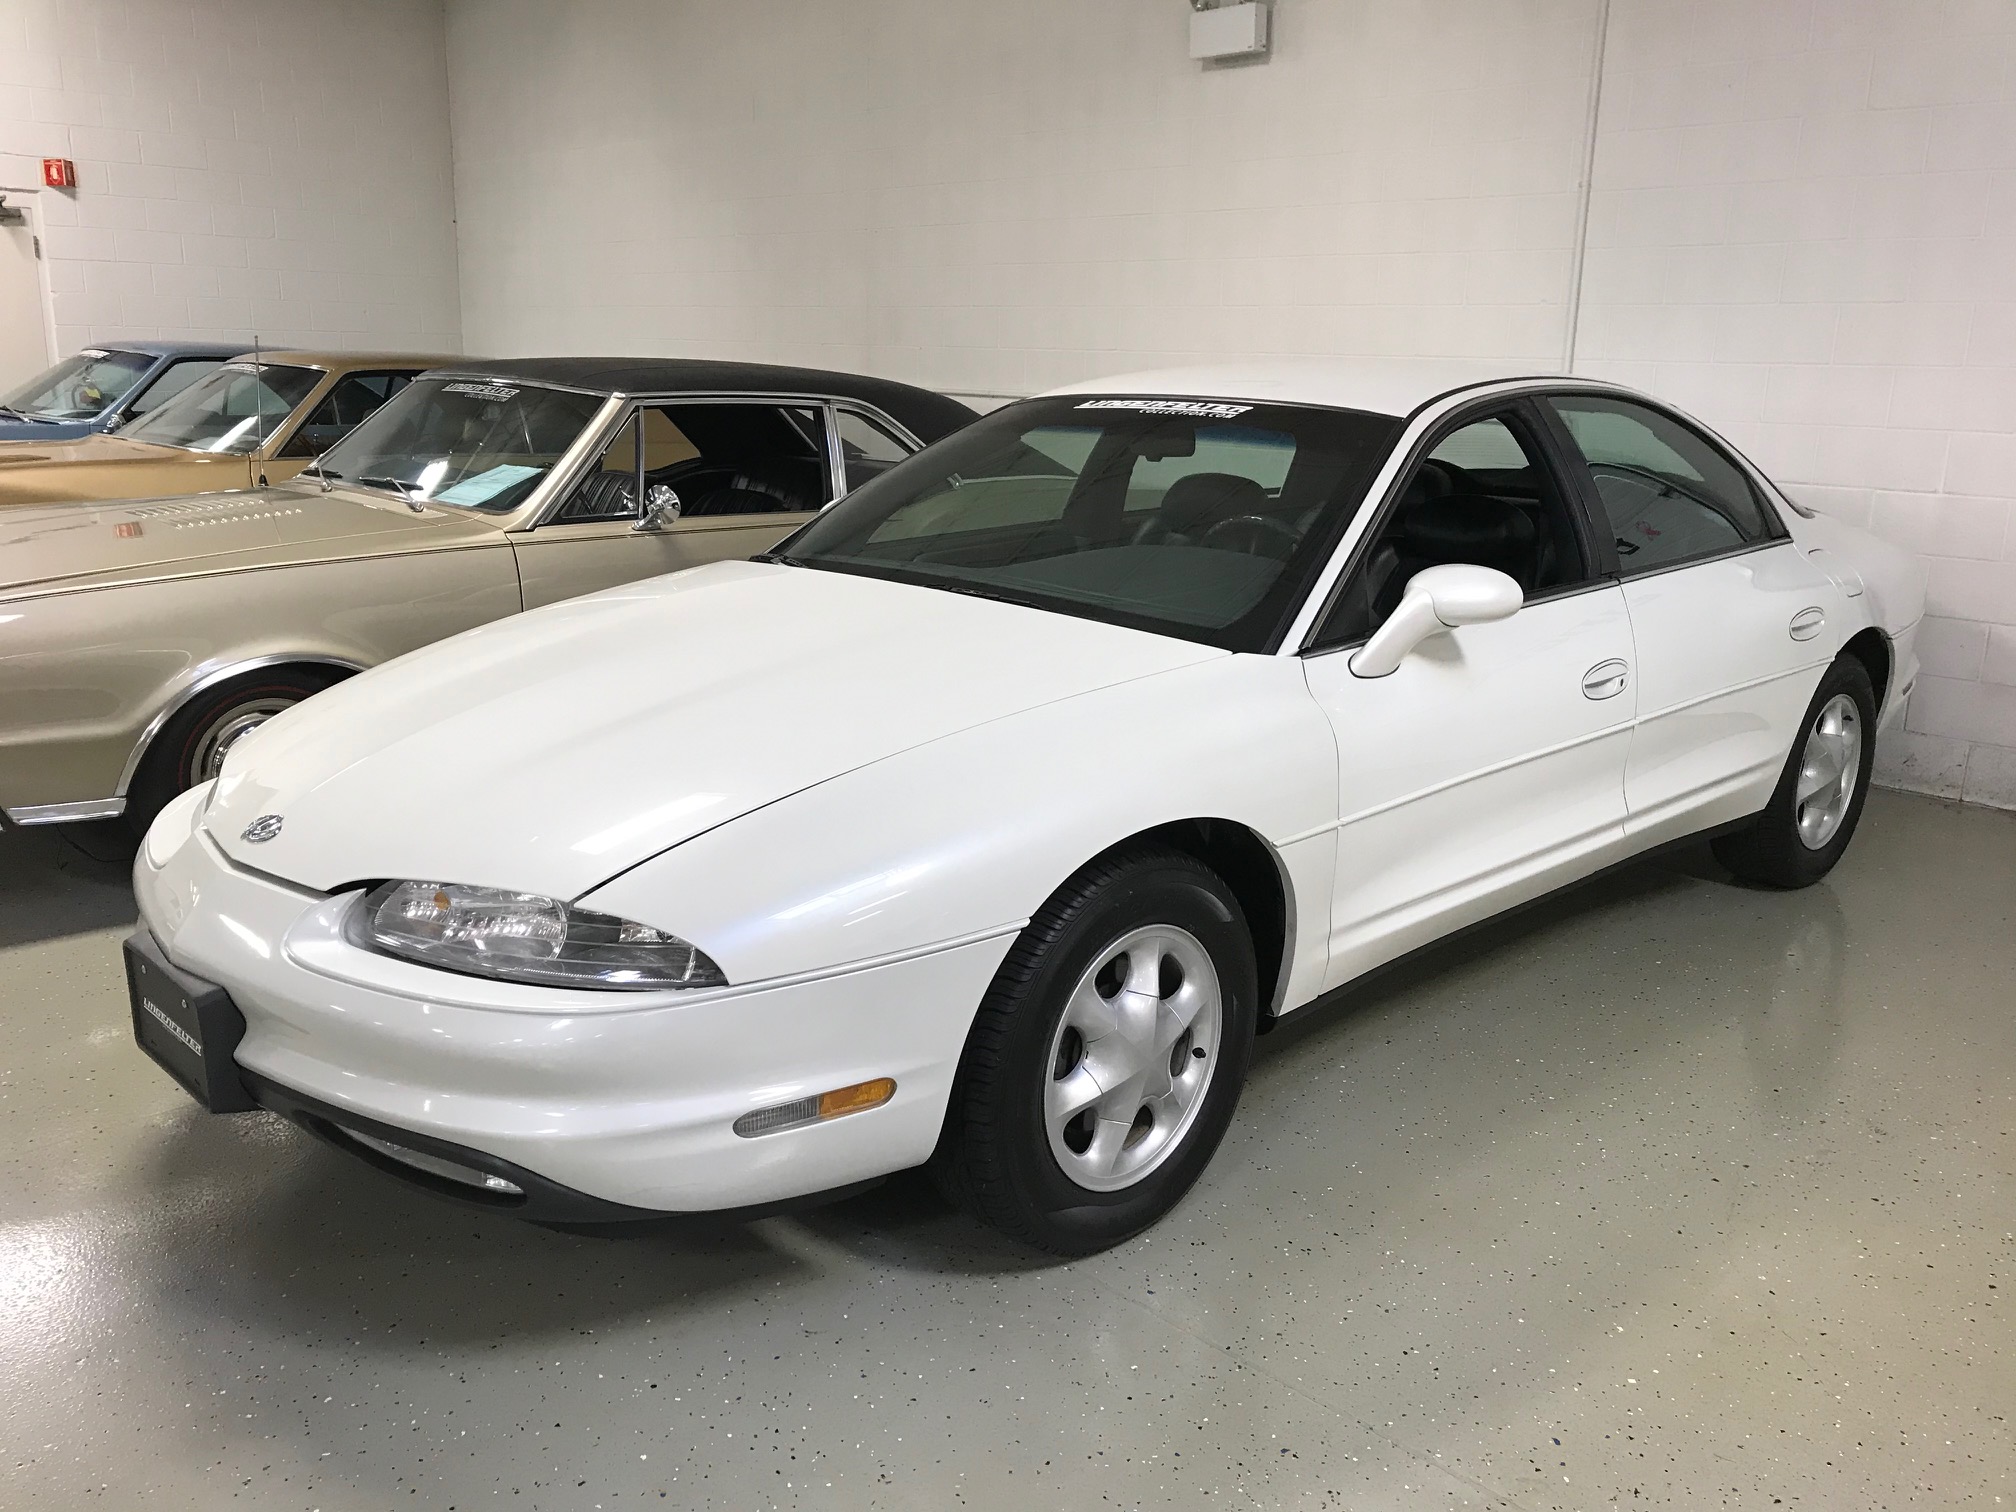 1997 Oldsmobile Aurora – The Lingenfelter Collection